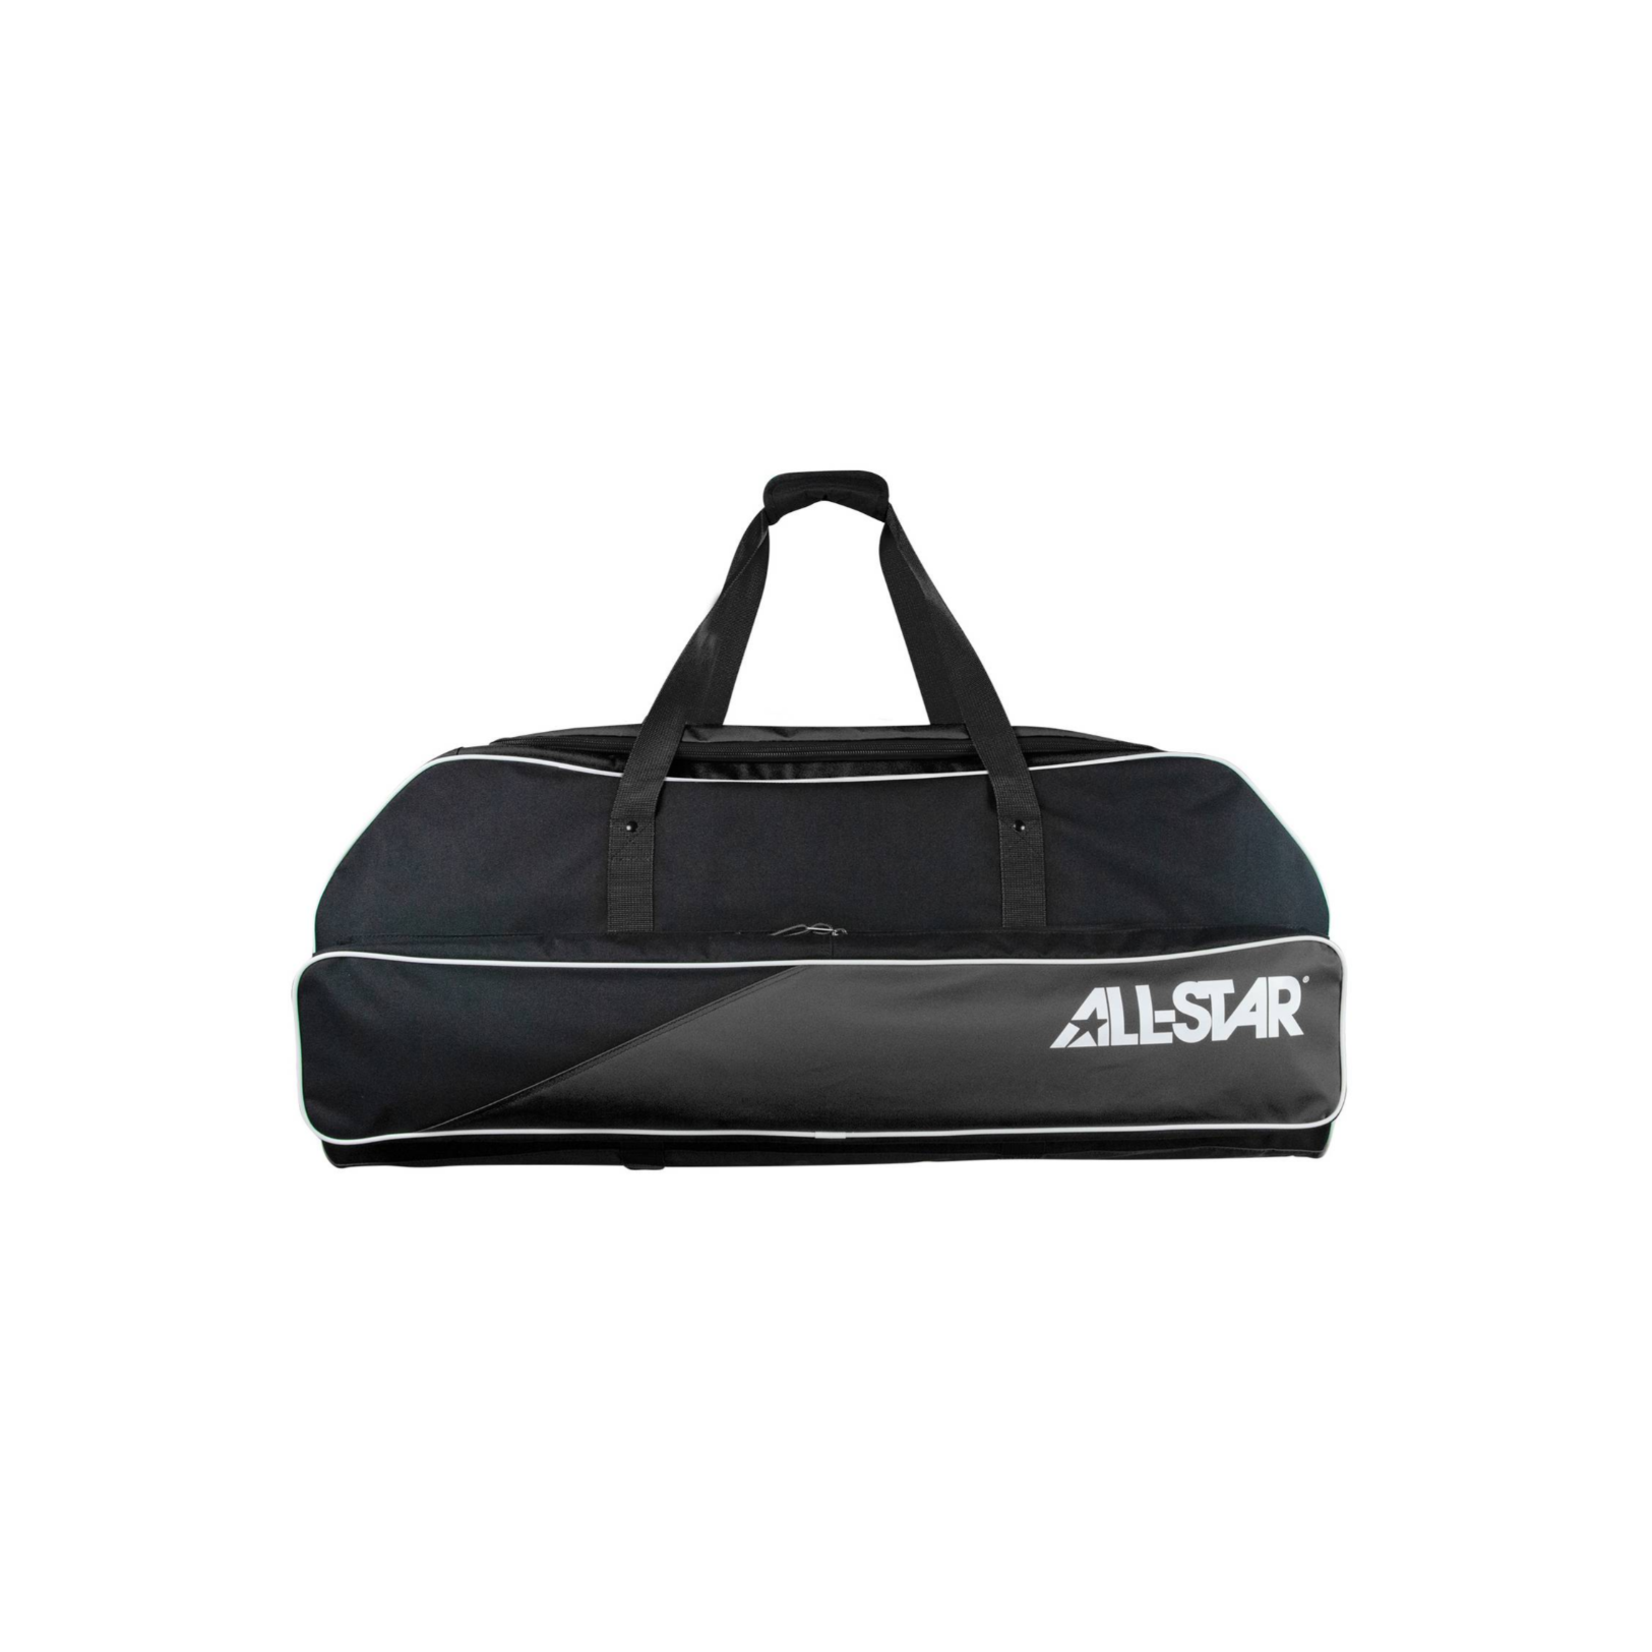 All-Star ALL-STAR PLAYER'S PRO CARRY CATCHER'S BAG